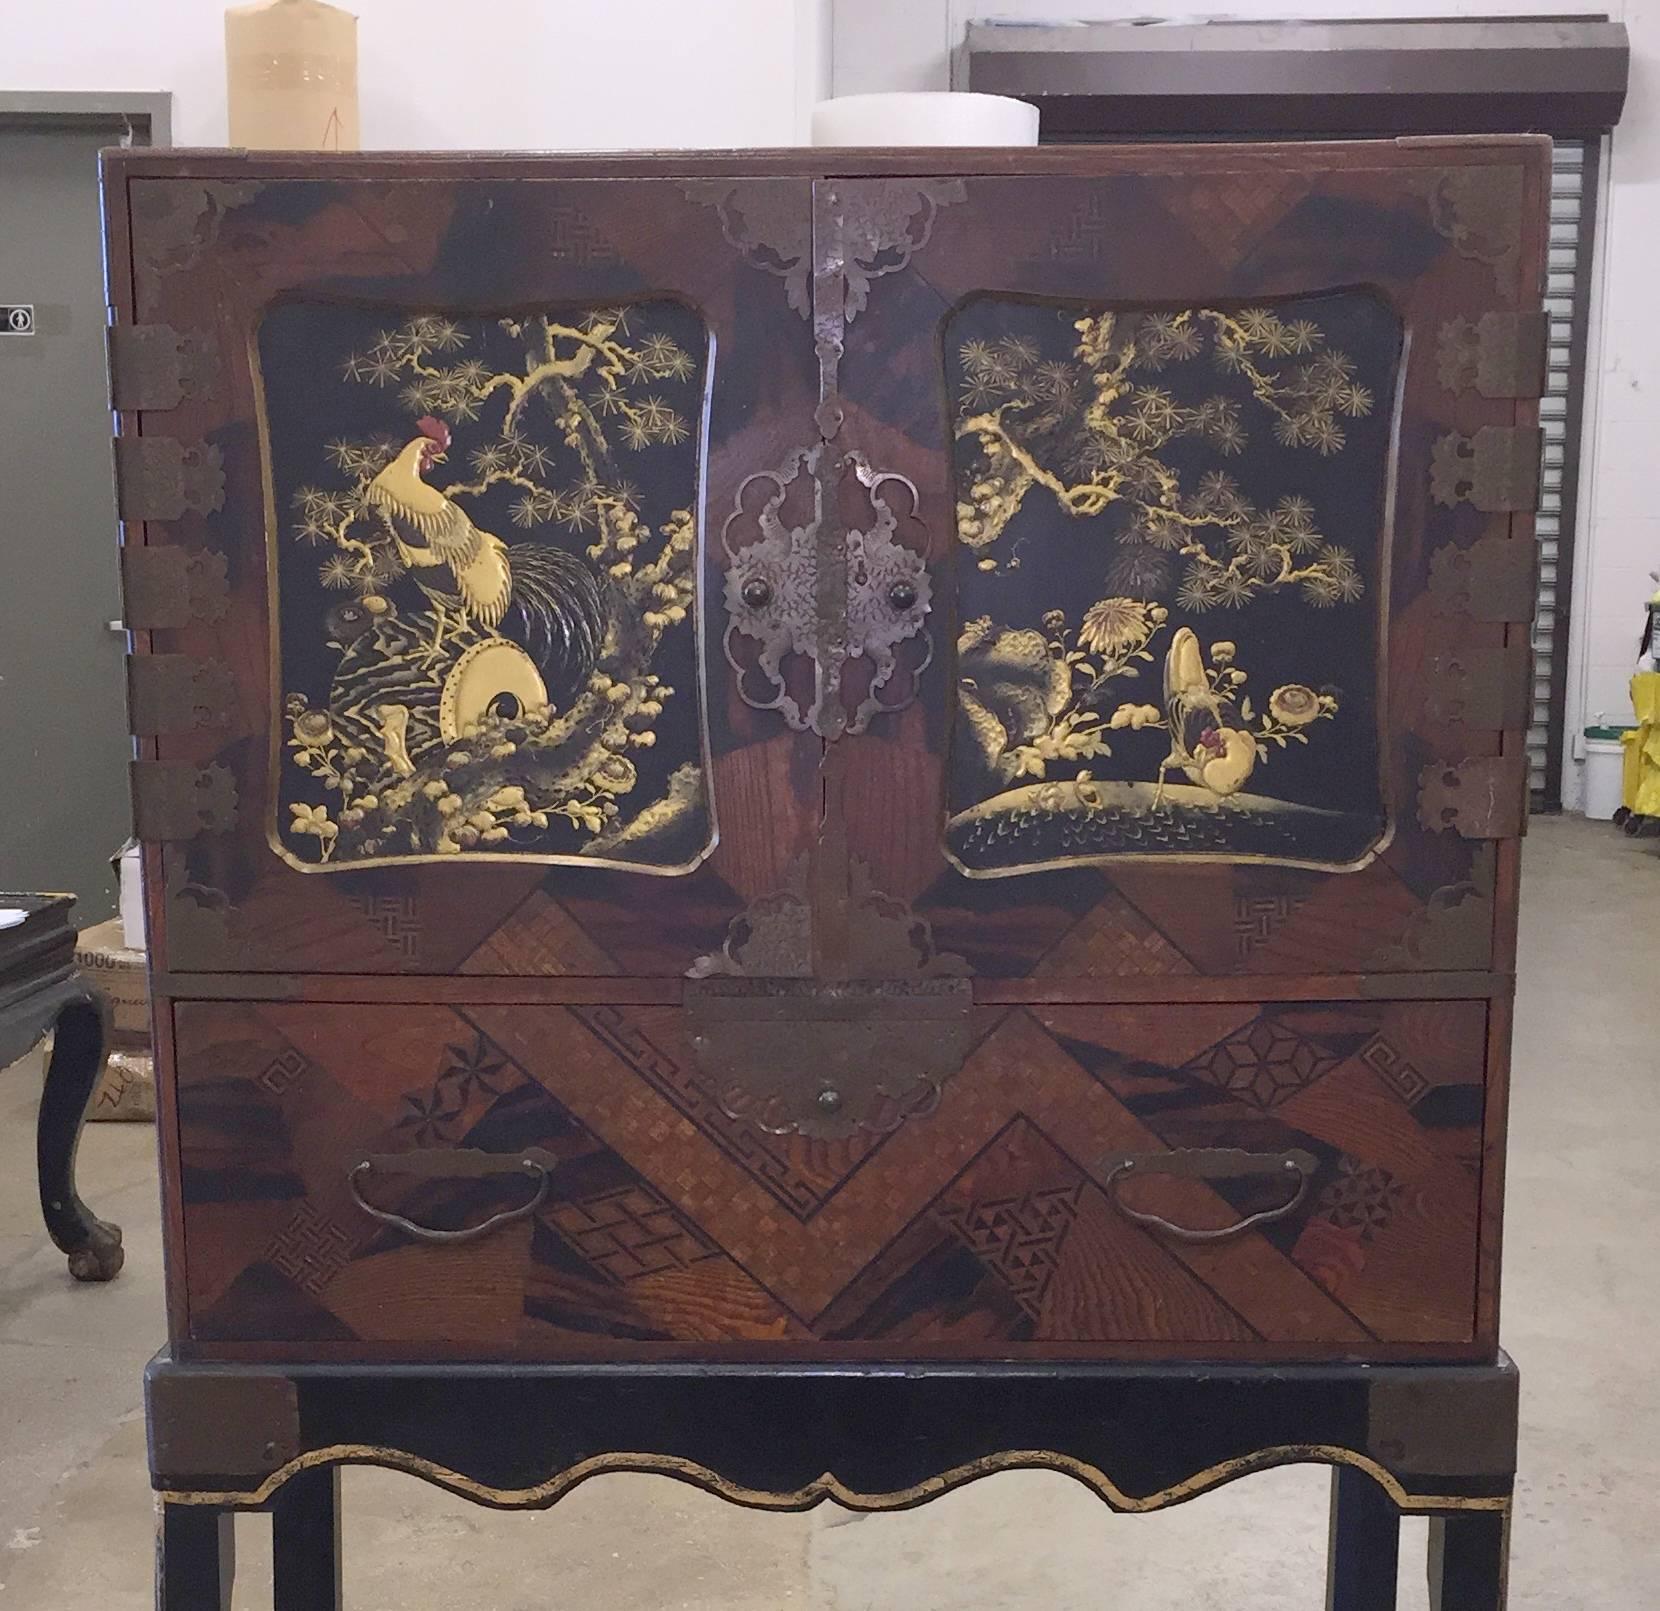 A fabulous 19th century Japanese marquetry cabinet.

Double doors with drawers inside.

Detailed makie raised lacquer design of cranes and clouds on the interiors of the doors and on the drawers.

The outside of the front has intricate inlaid